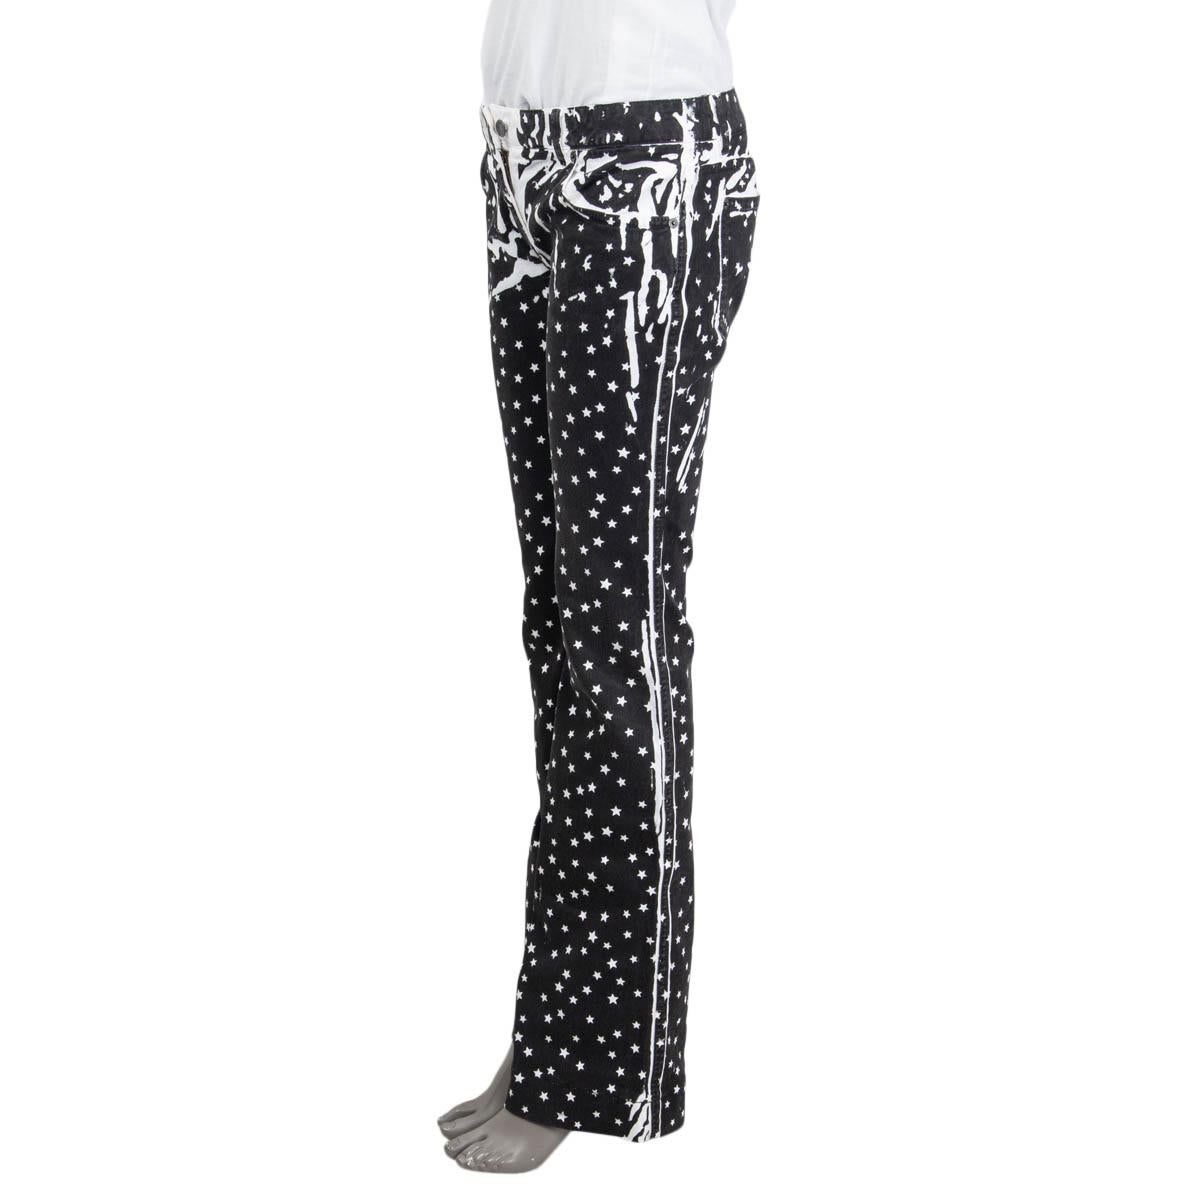 100% authentic Dolce & Gabbana star printed flared denim jeans in black and white cotton (98%) and elastane (2%). Feature two slit pockets on the front and two patch pockets on the back. Open with a button and a concealed zipper on the front.